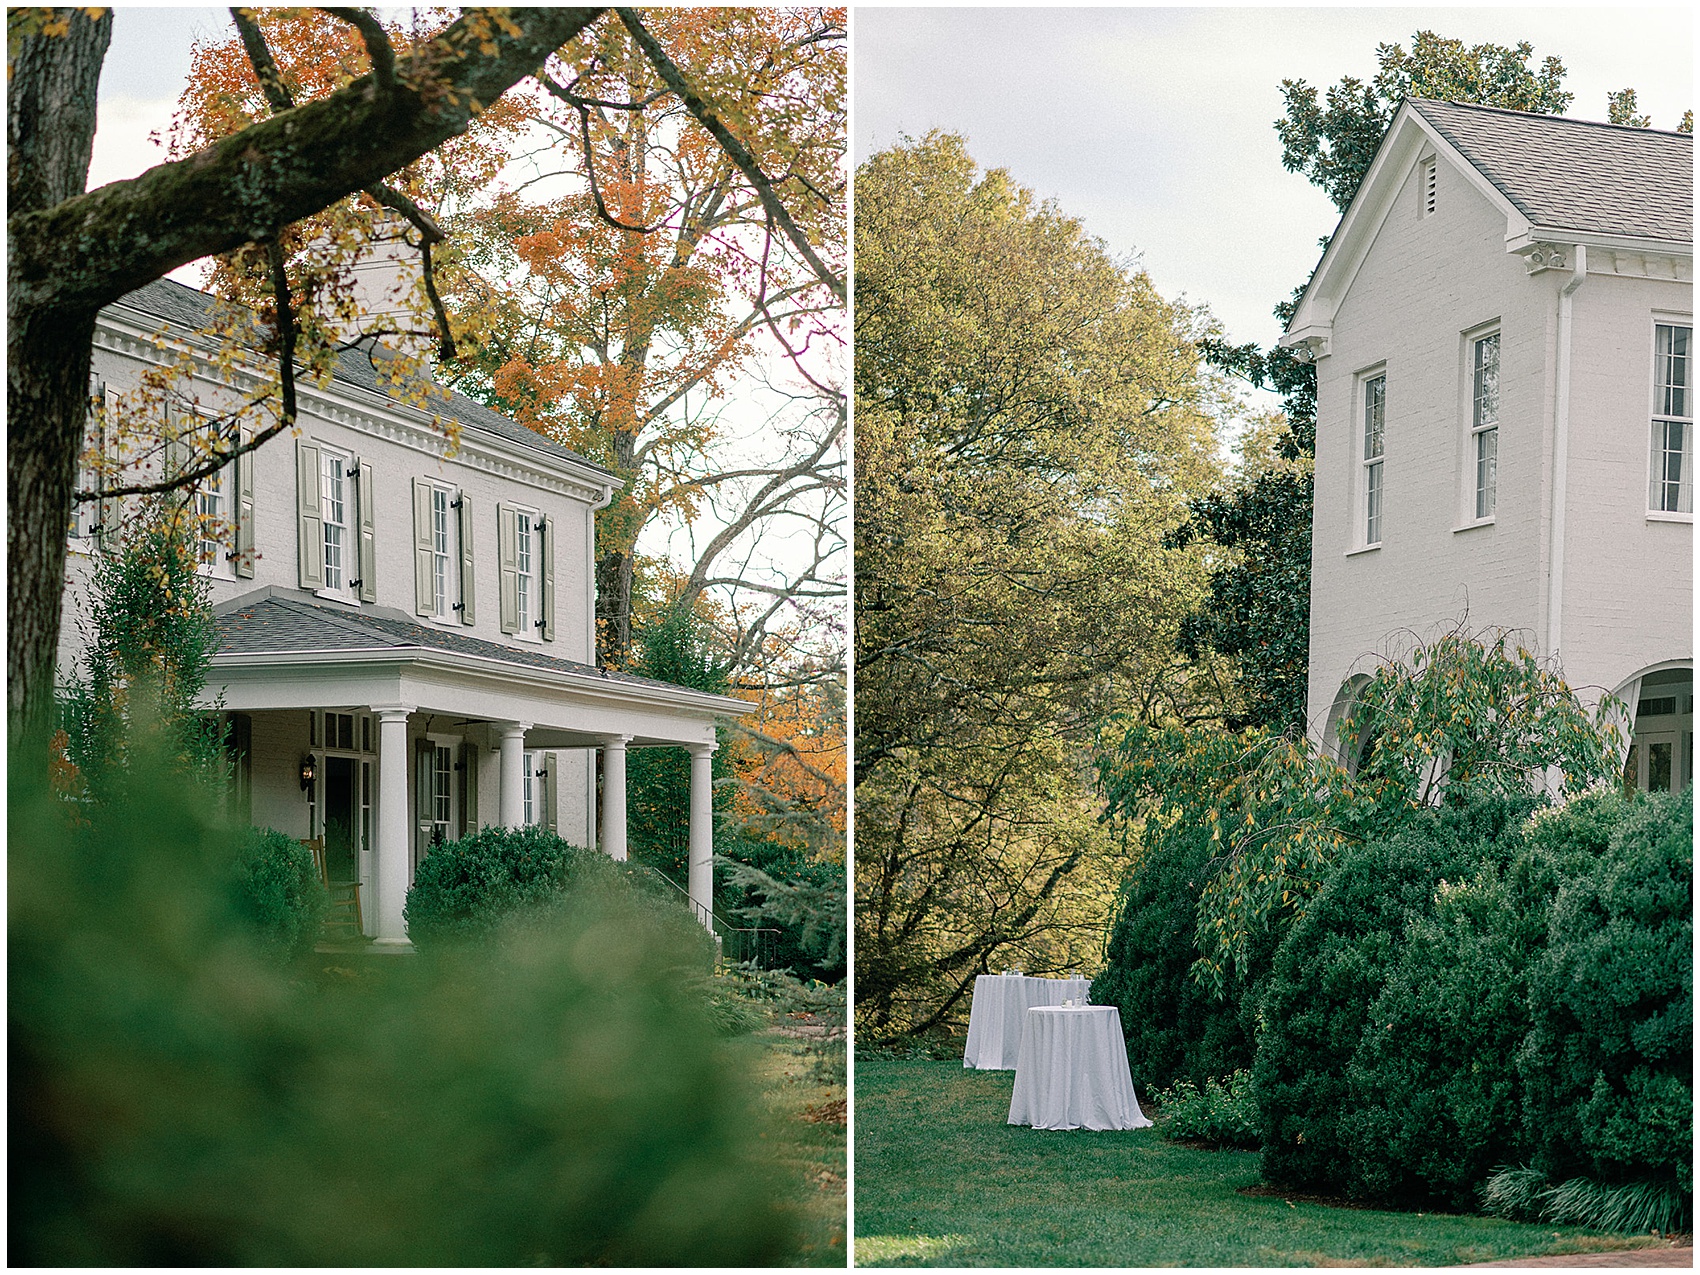 Details of the front porch and side lawn of the maple grove estate wedding venue